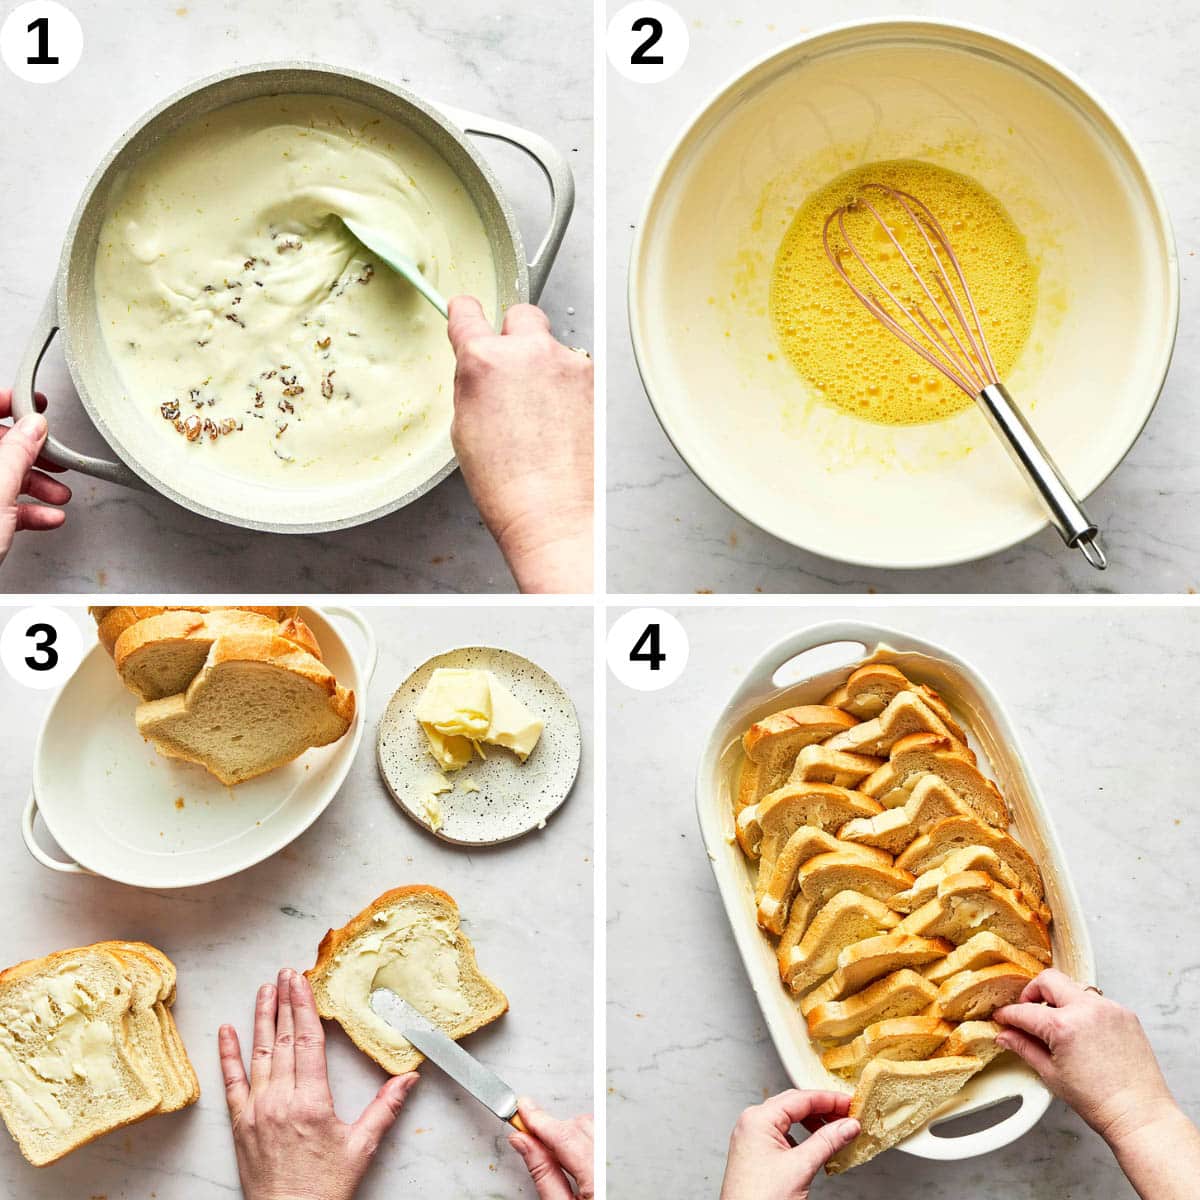 Pudding steps 1 to 4, mixing the cream, whisking the eggs, and buttering the bread for the dish.